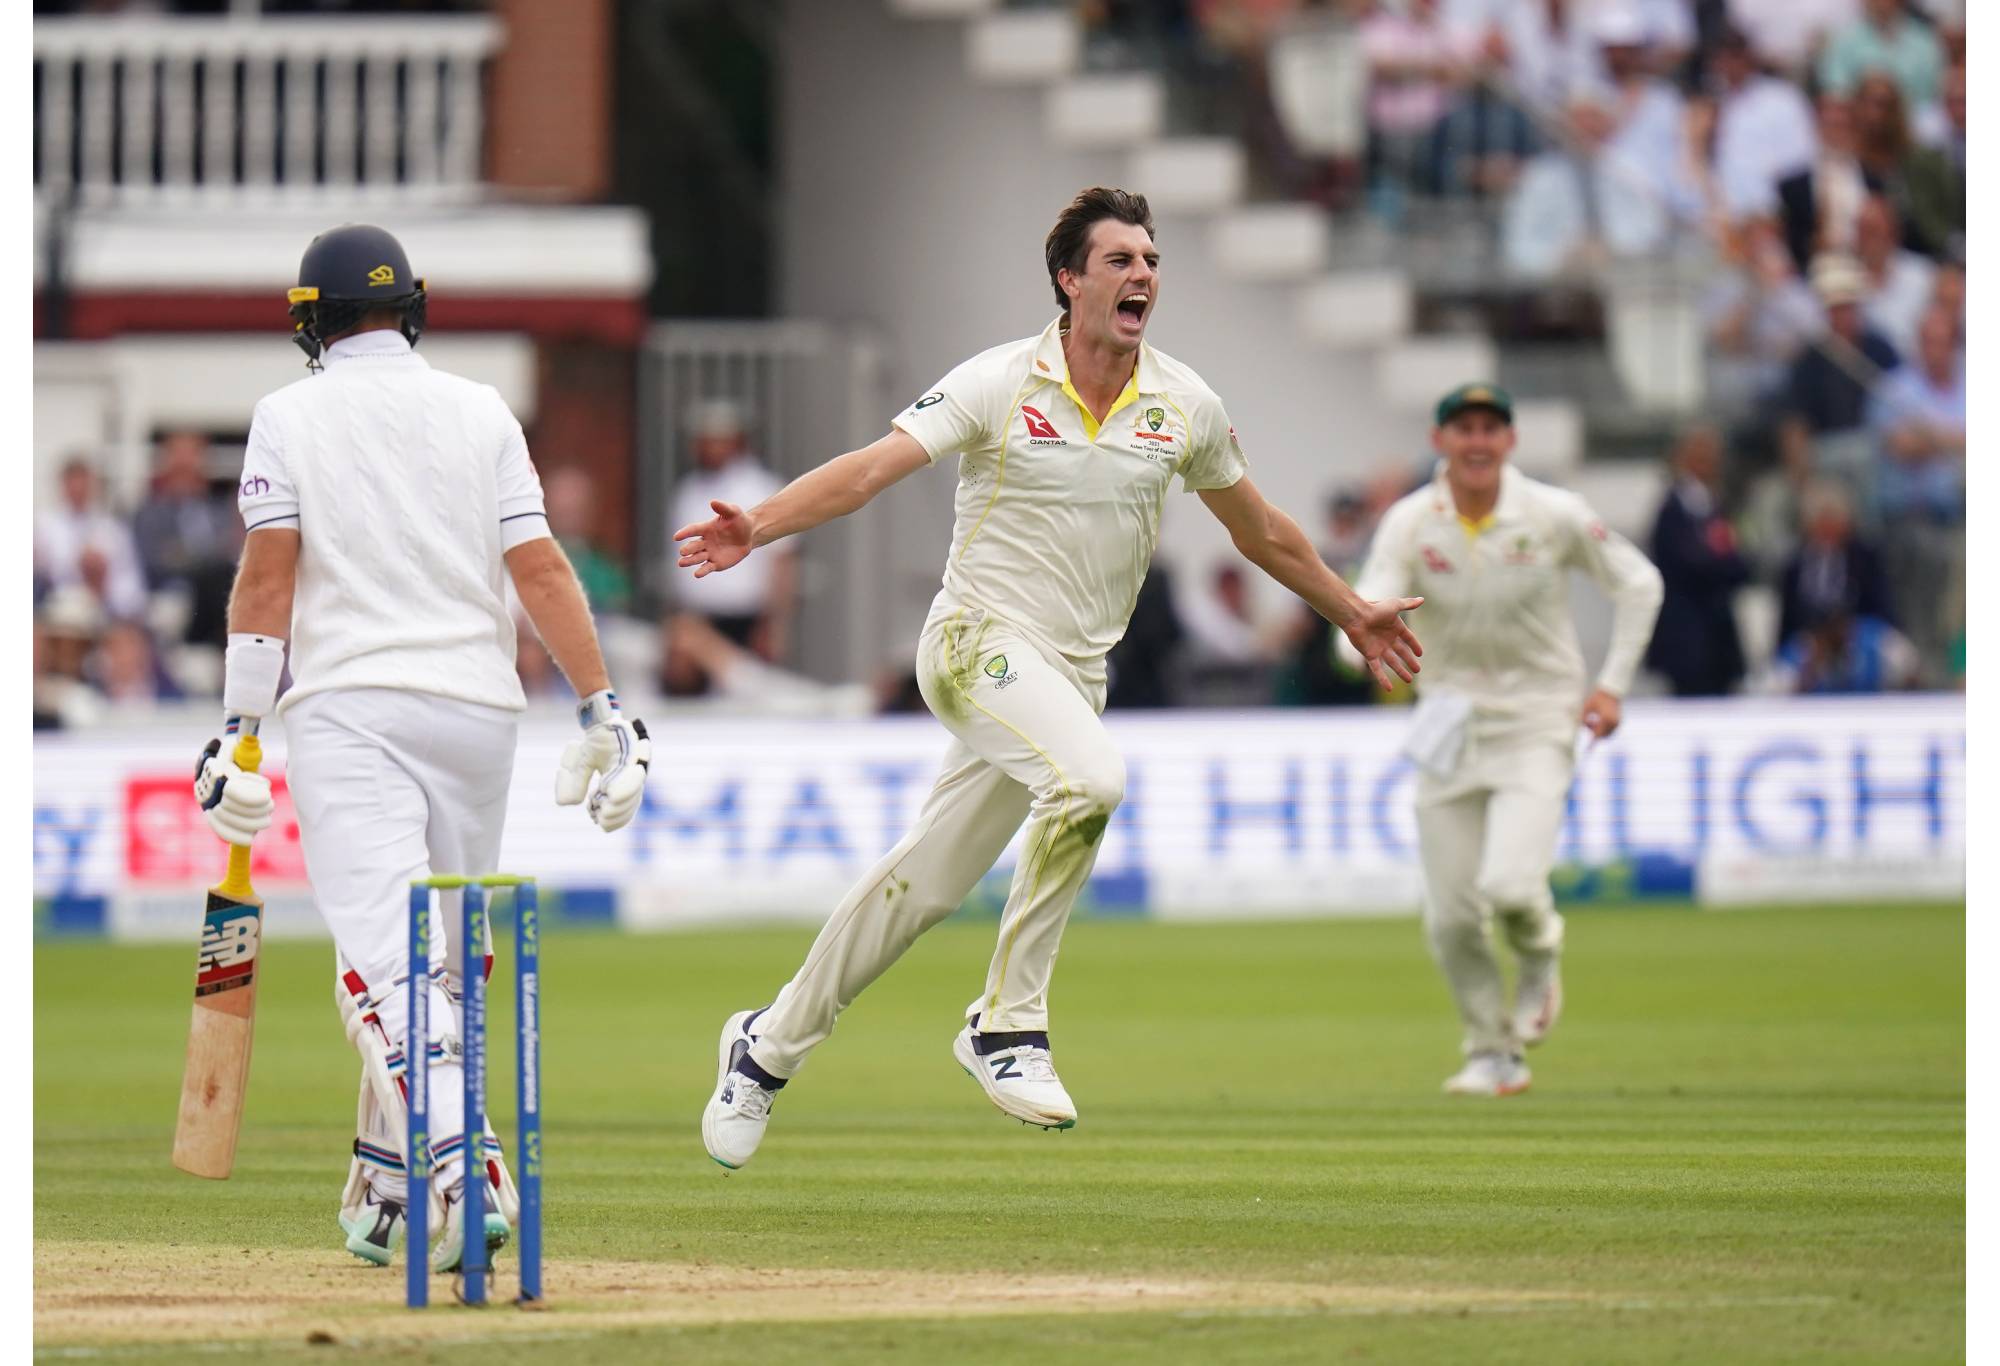 Australia's Pat Cummins celebrates taking the wicket of England's Joe Root during day four of the second Ashes test match at Lord's, London. Picture date: Saturday July 1, 2023. (Photo by Adam Davy/PA Images via Getty Images)